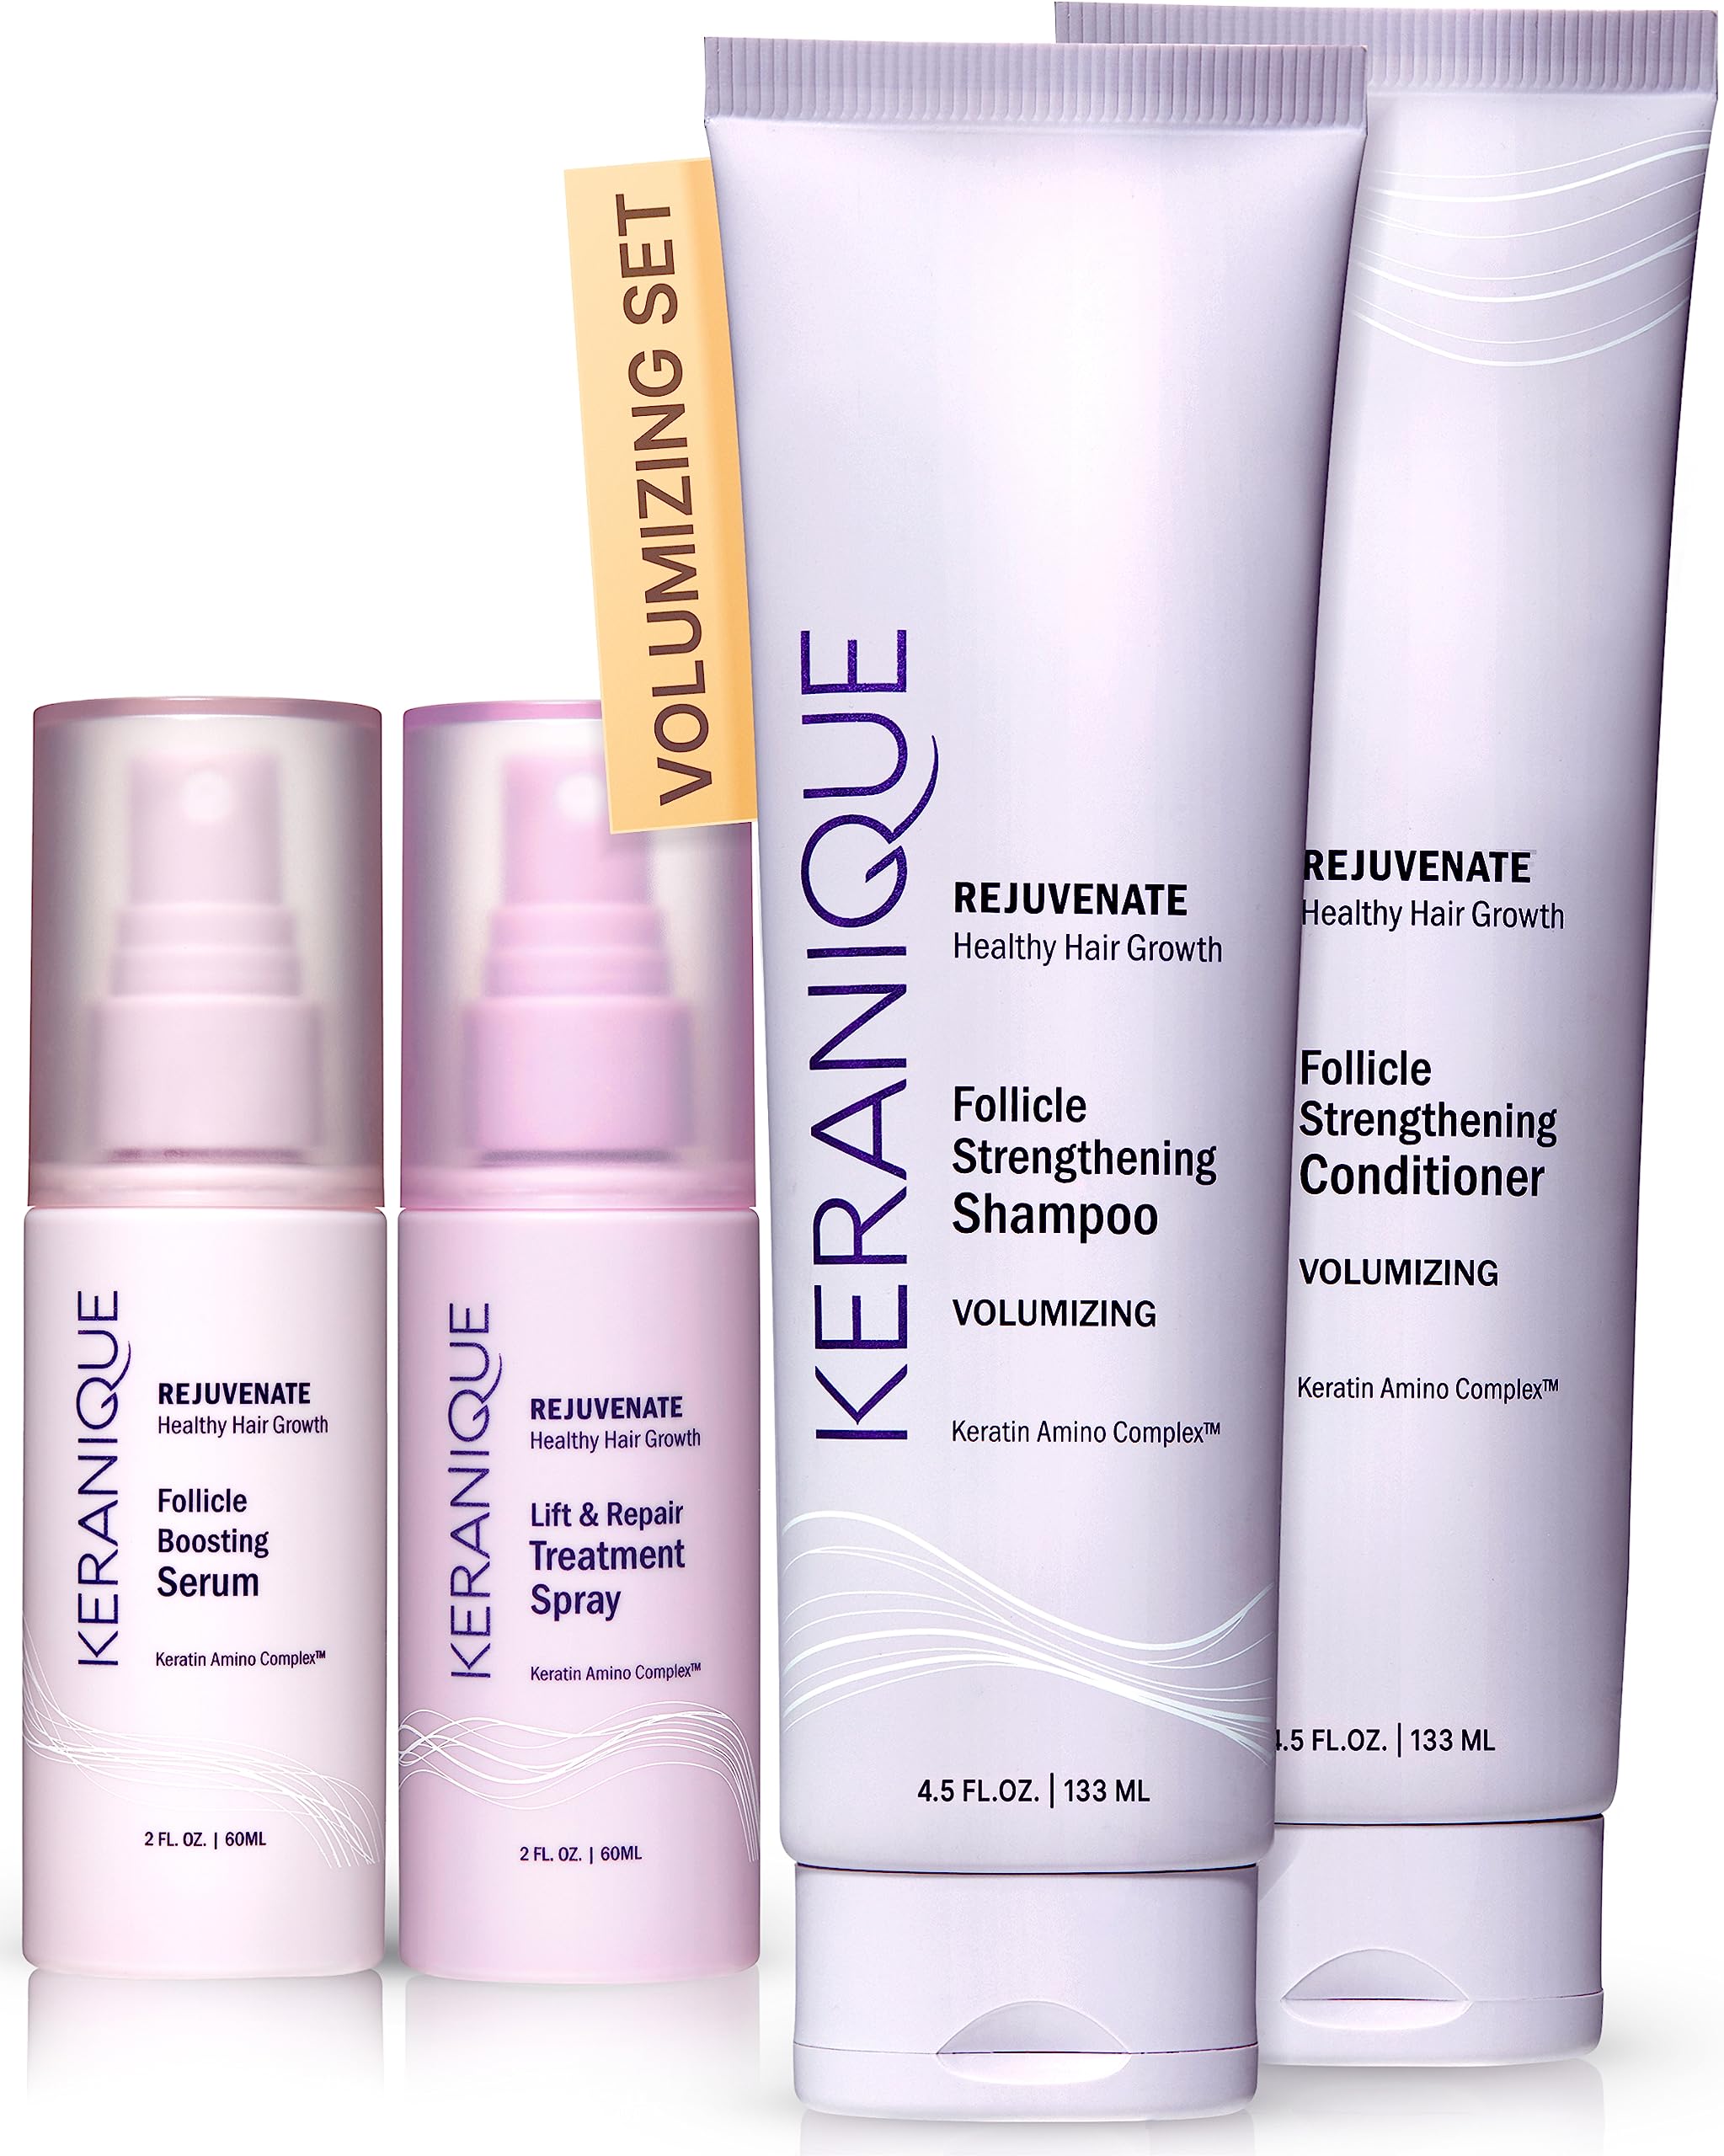 Volumizing Hair Growth System by Keranique includes Keratin Shampoo, Conditioner, Follicle Boosting Hair Growth Serum and Instant Volume Lift and Repair Treatment Spray Paraben Sulfate Free